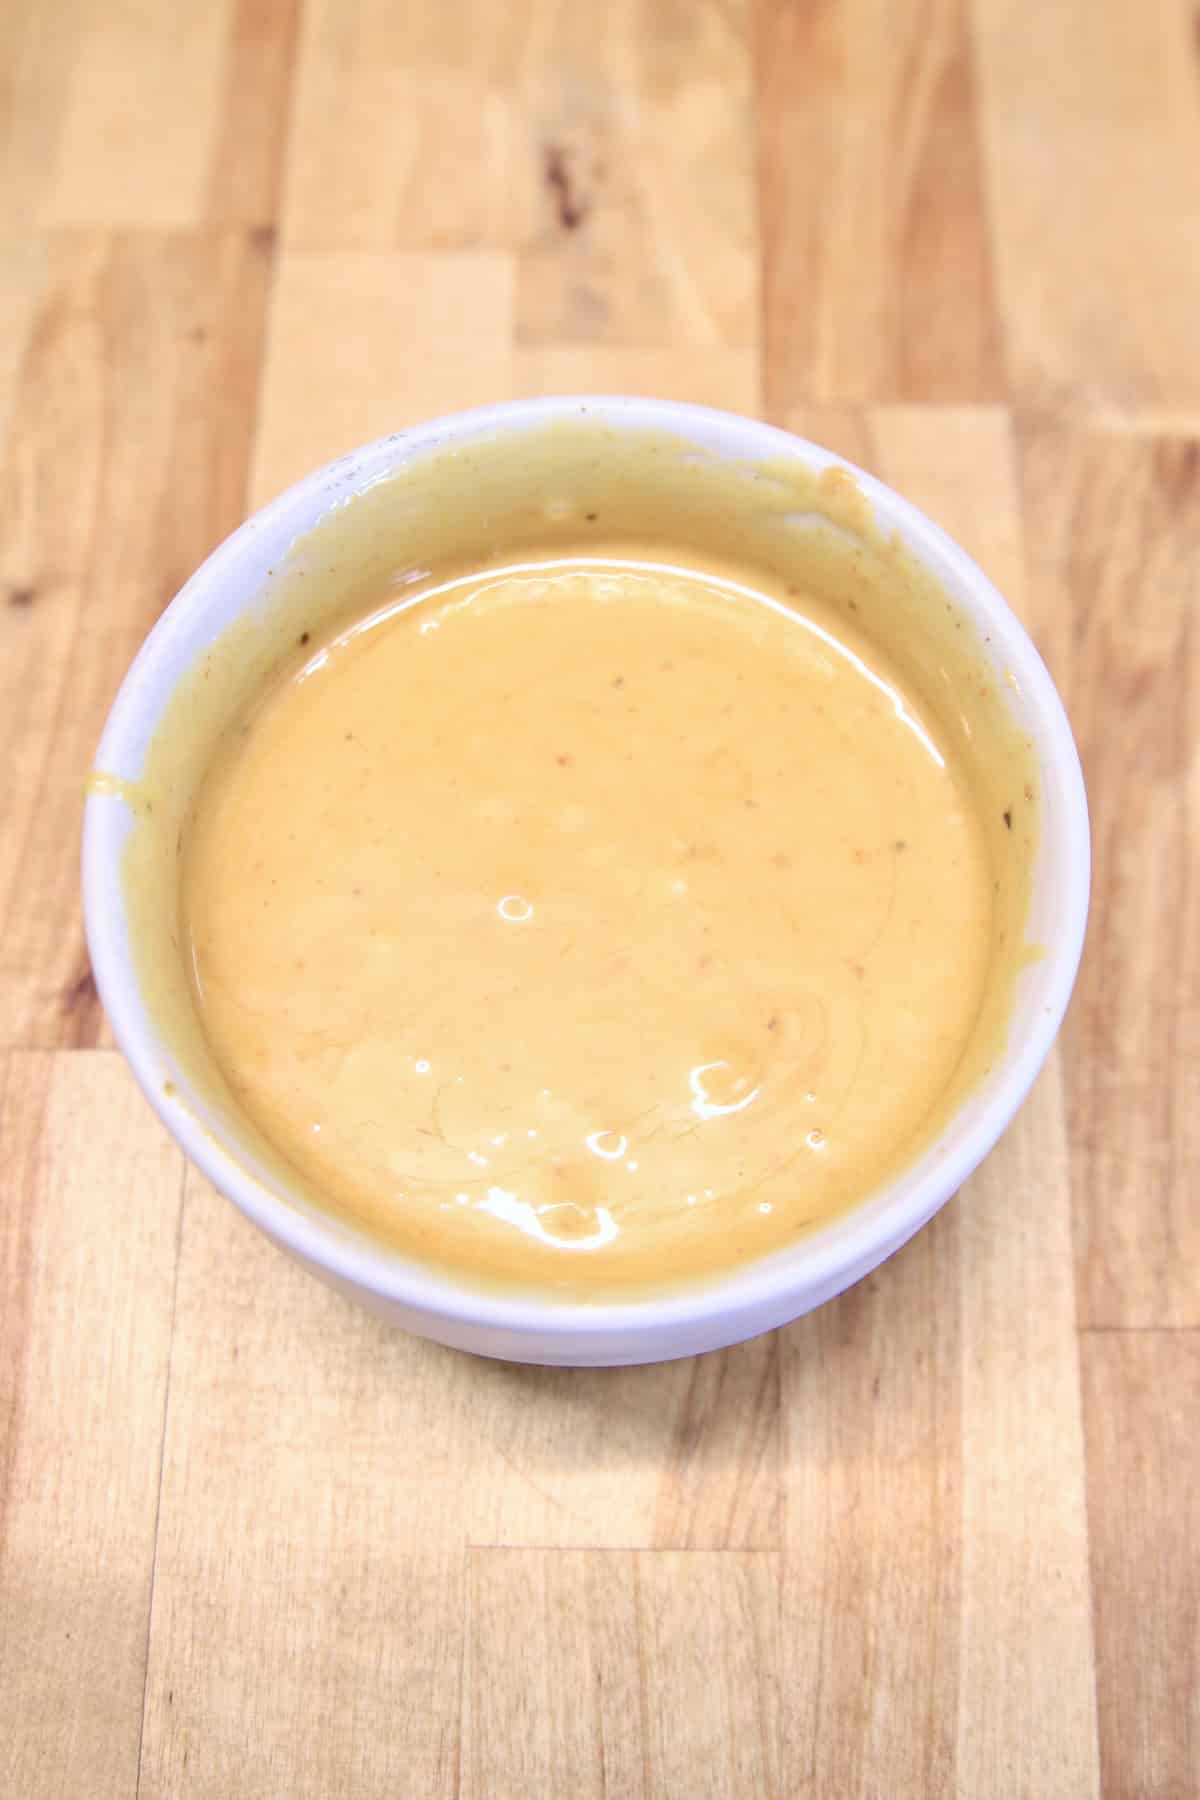 Bowl of Chick Fil A dipping sauce on wood counter.